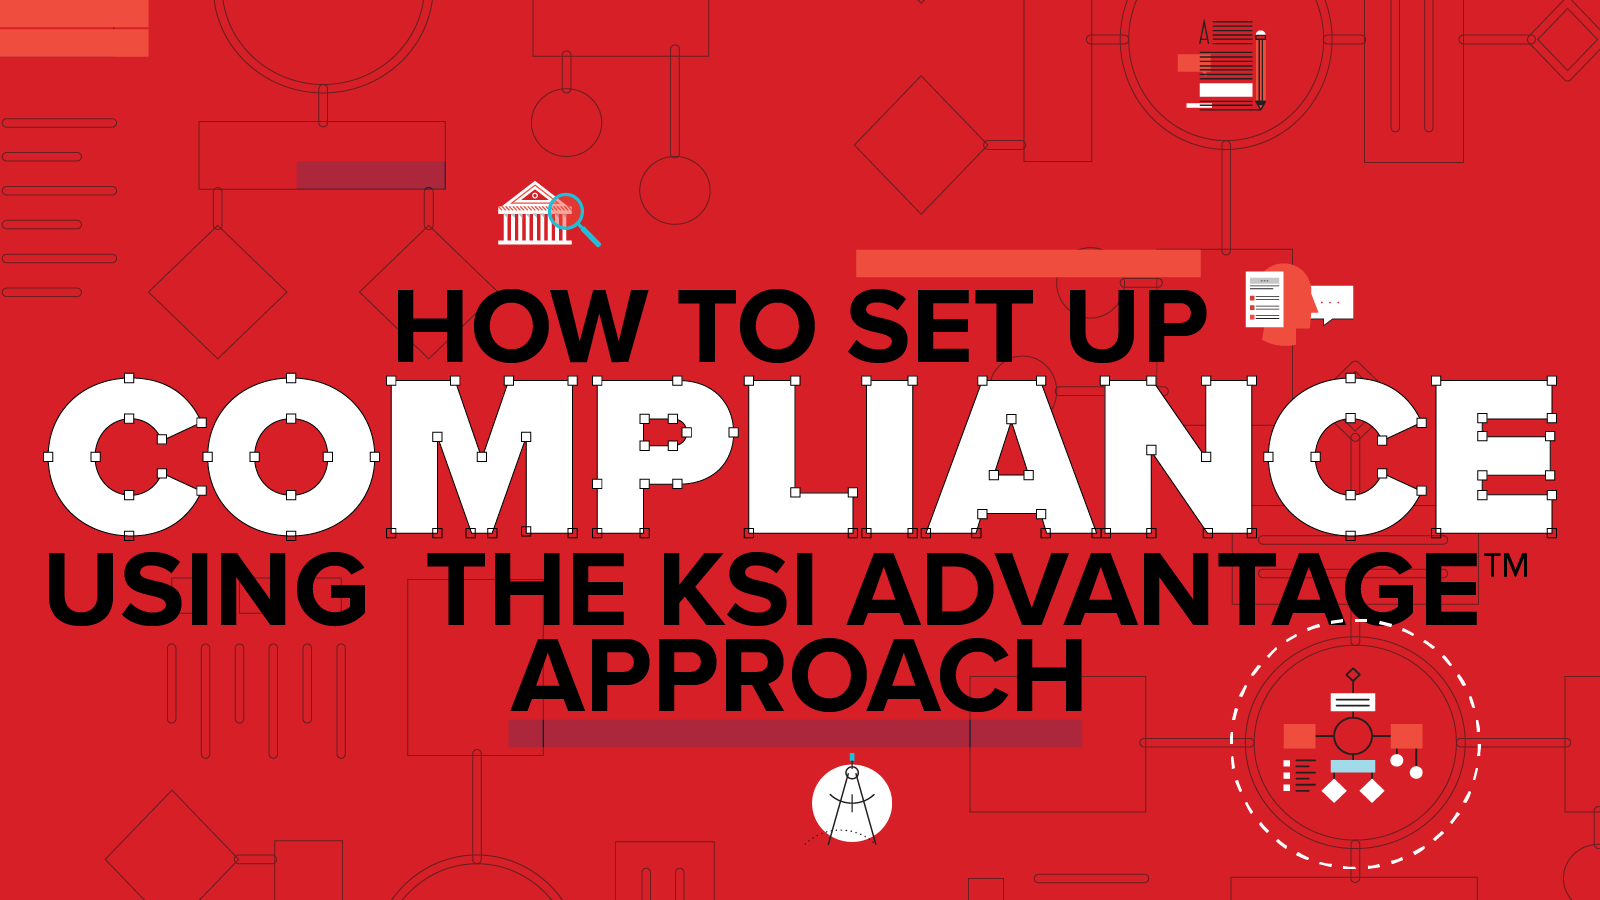 How to Achieve RFP Compliance Using the KSI Advantage Approach